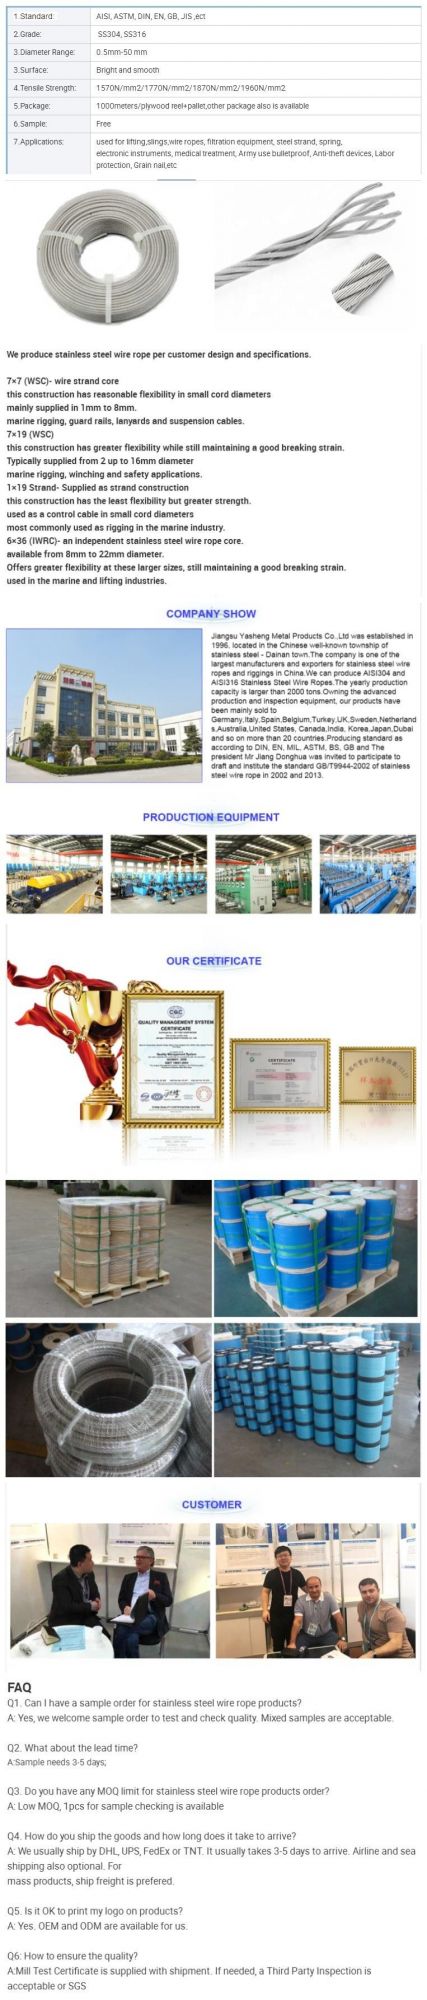 Stainless Wire Rope Factory Selling, Top Quality, Reasonable Price